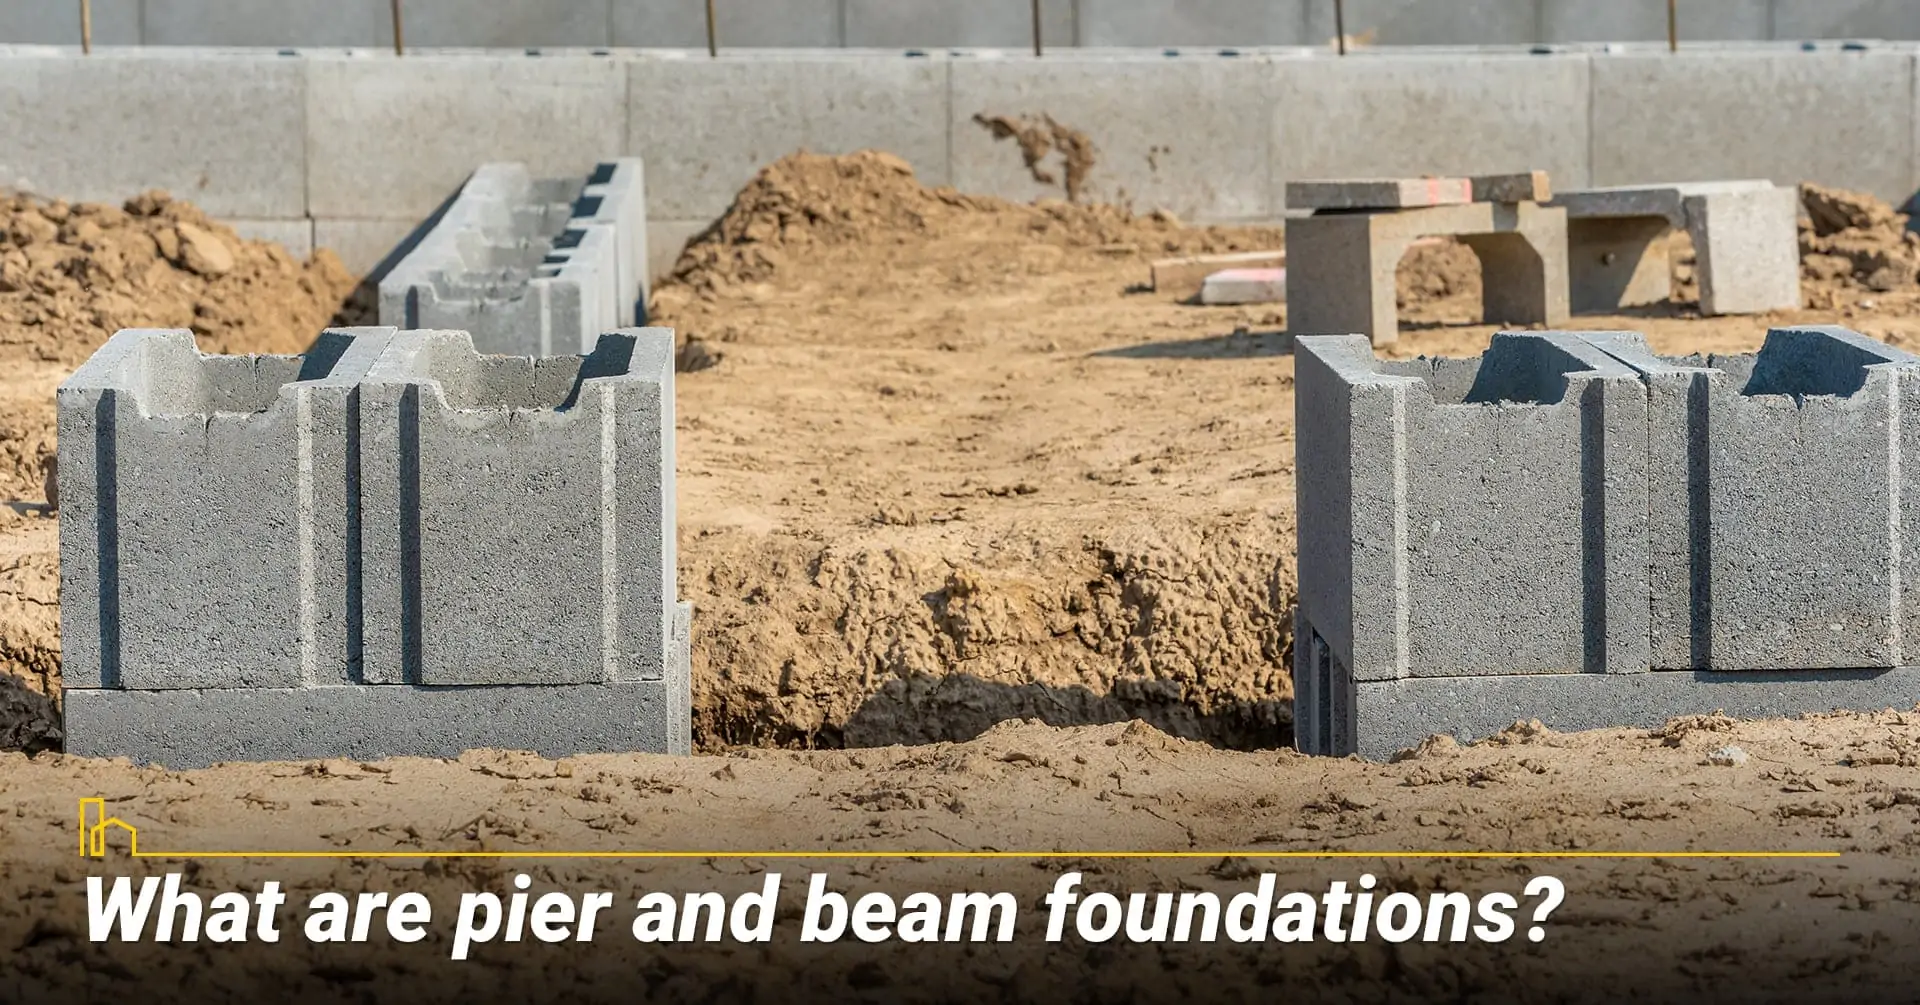 What are pier and beam foundations? foundations of your home